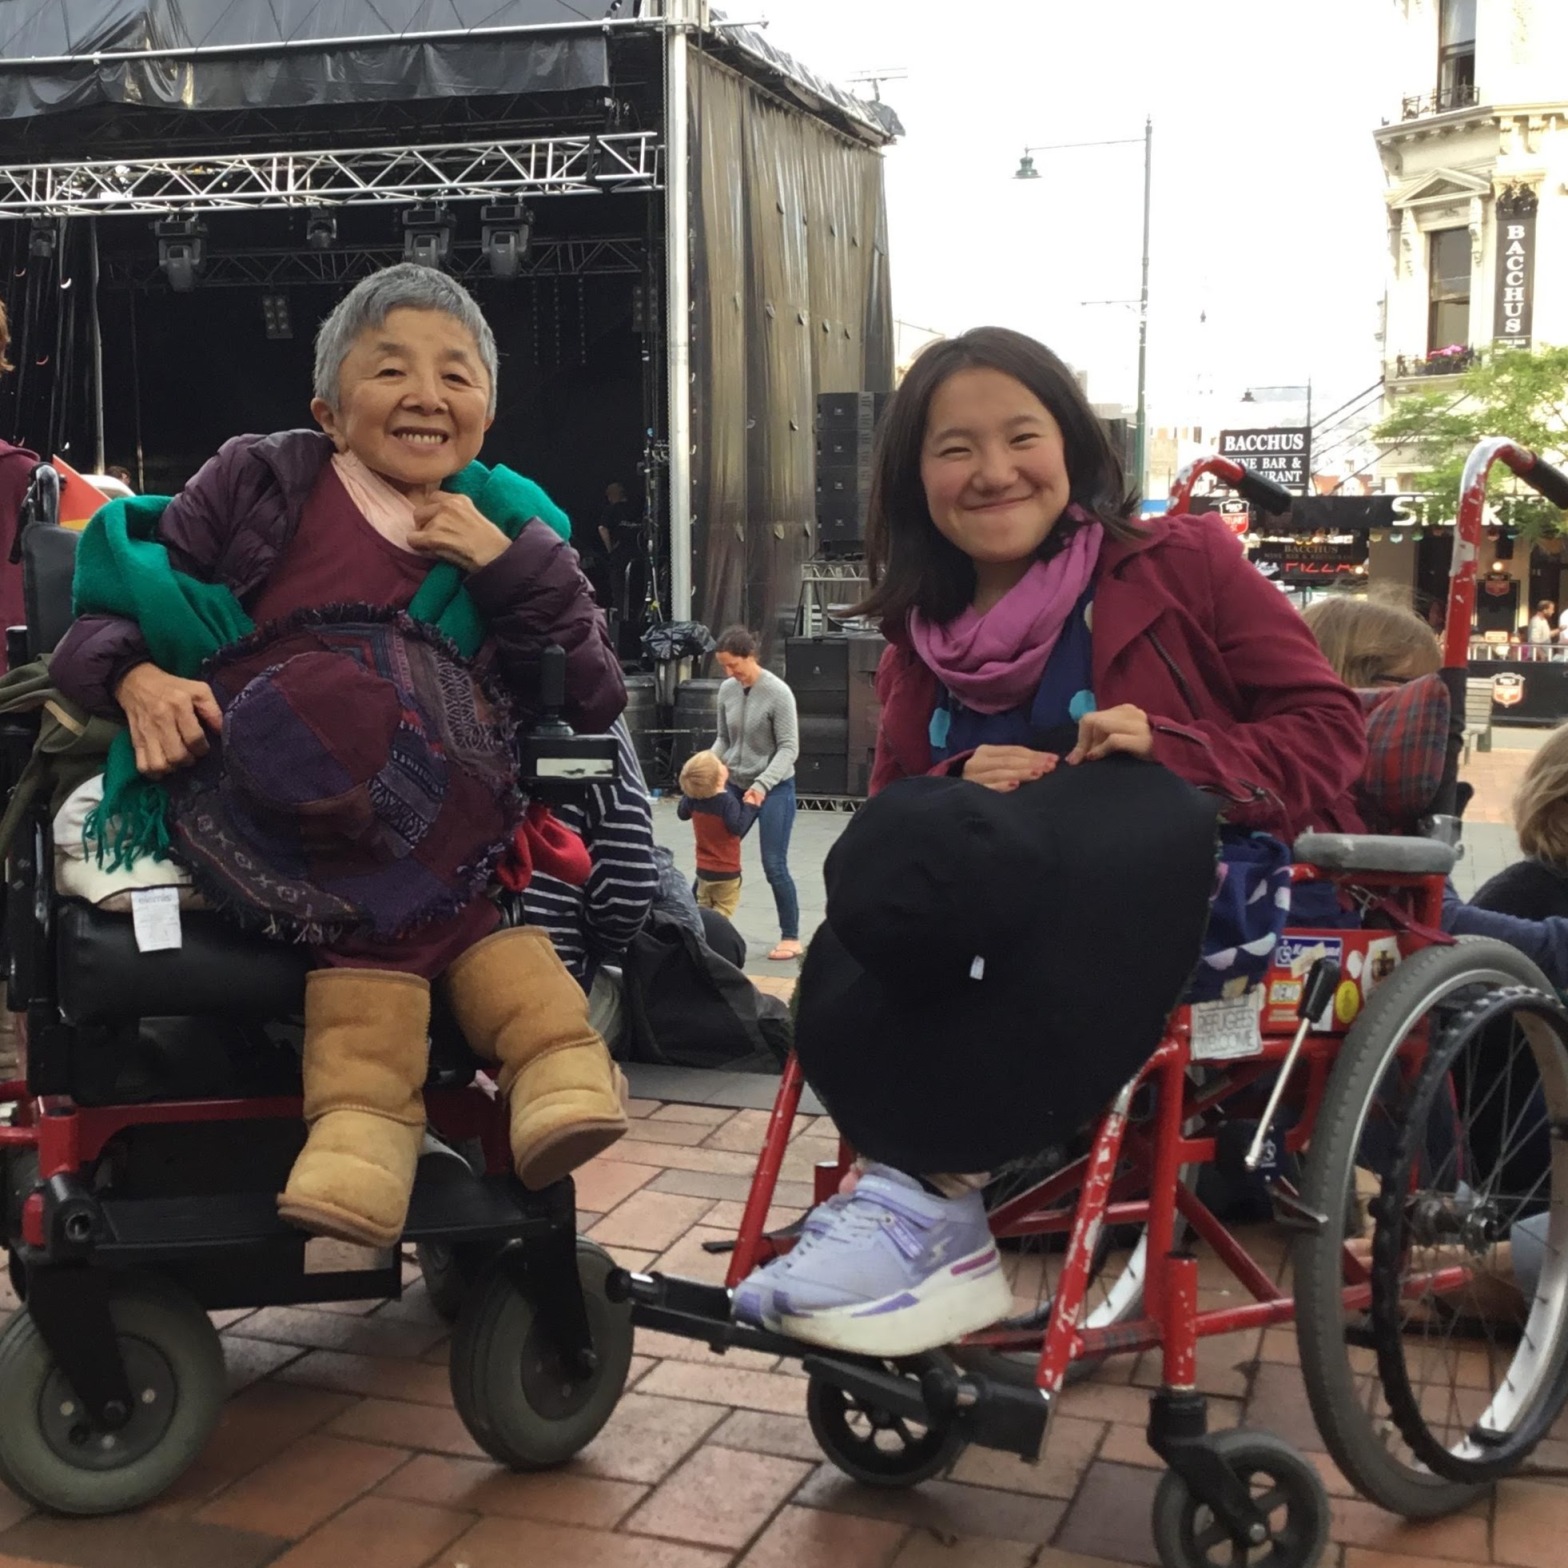 A Japanese mother and daughter both using wheelchairs. They sit in front of a New Year's Concert stage in the city centre.